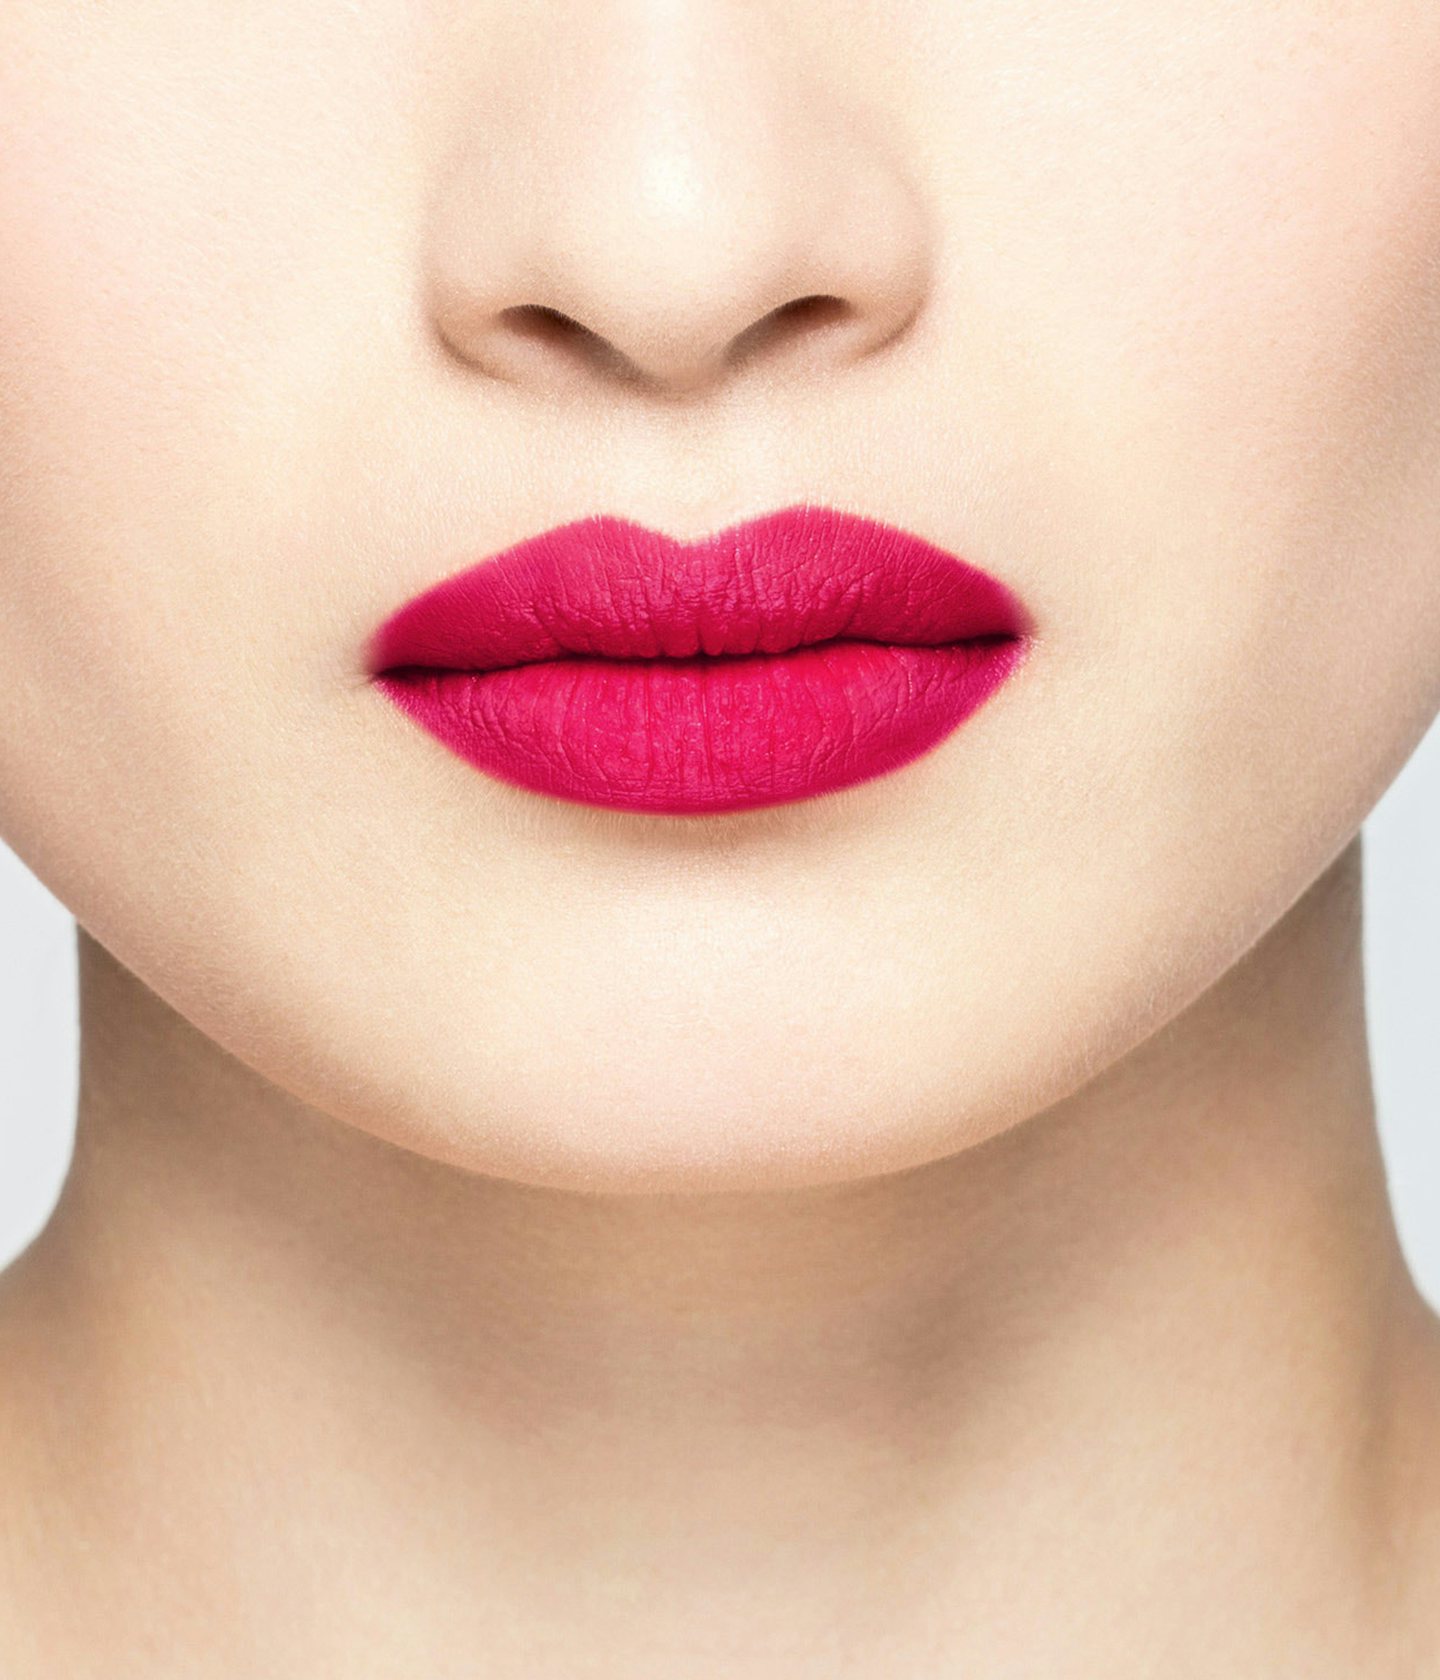 La bouche rouge Princess Pink lipstick shade on the lips of an Asian model